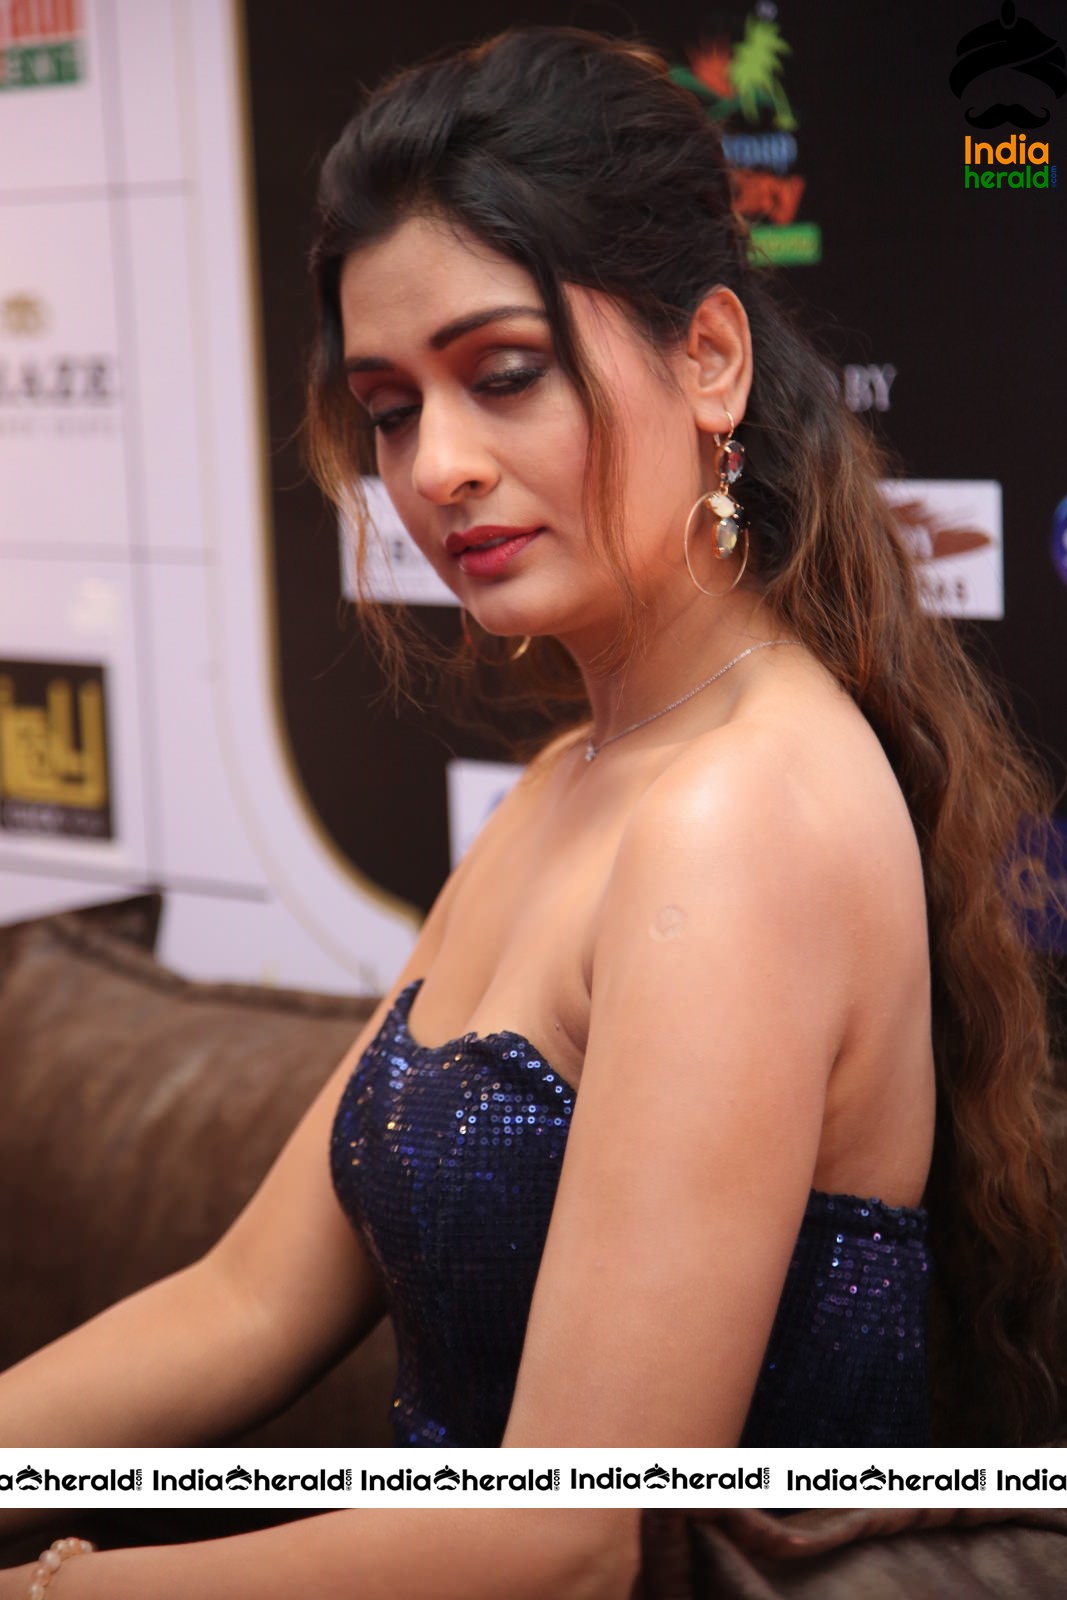 More Hot and Sexy Photos Of Payal Rajput From The Award Show Set 5